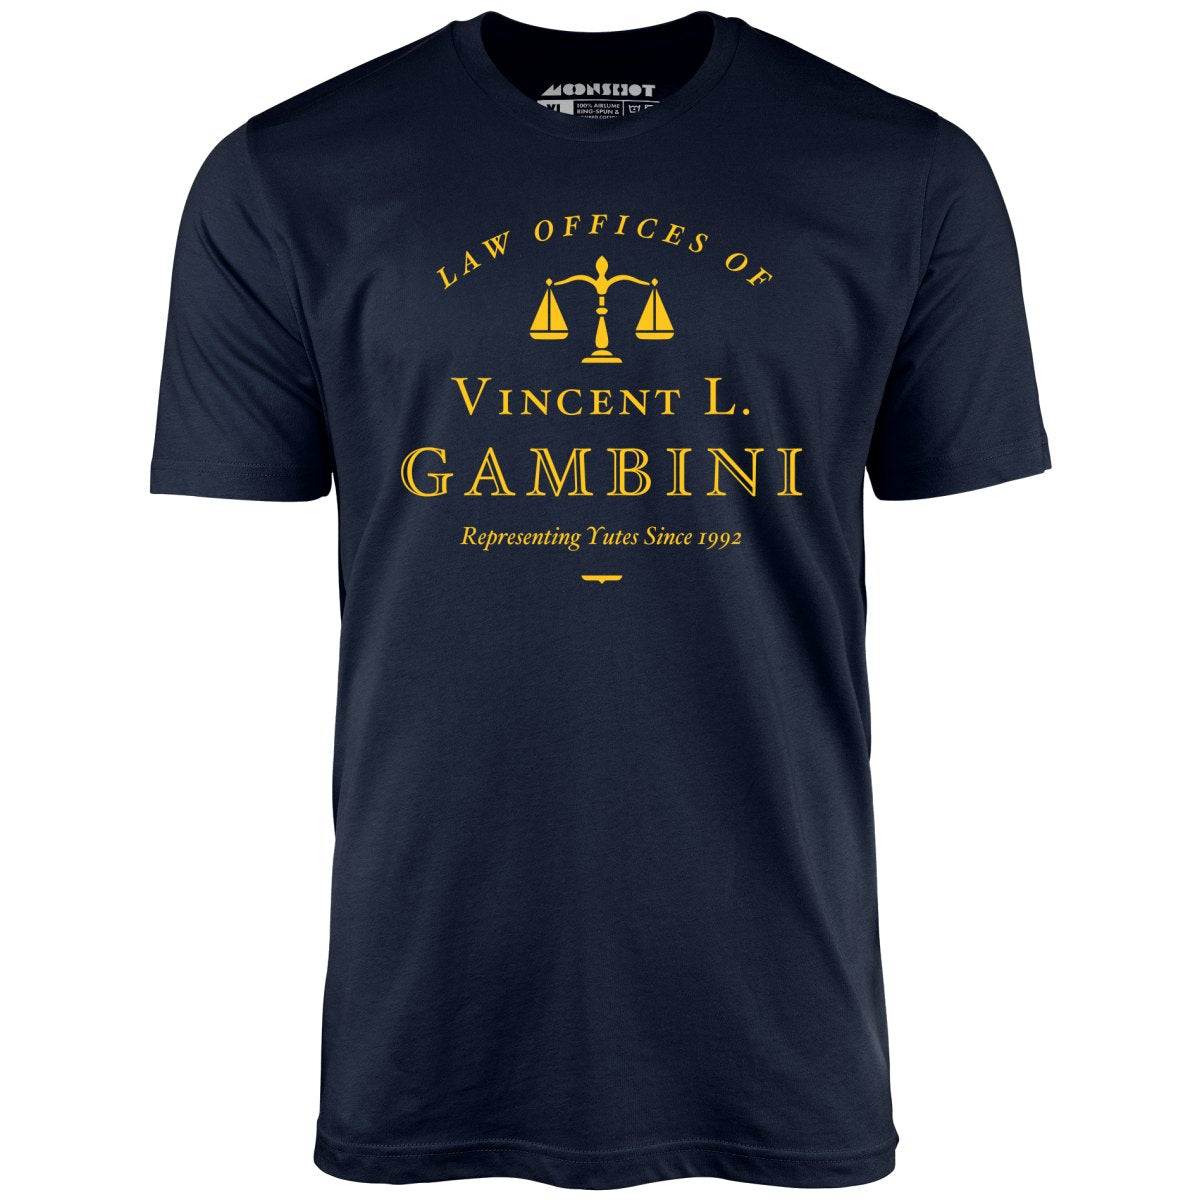 Law Offices of Vincent L. Gambini - Unisex T-Shirt